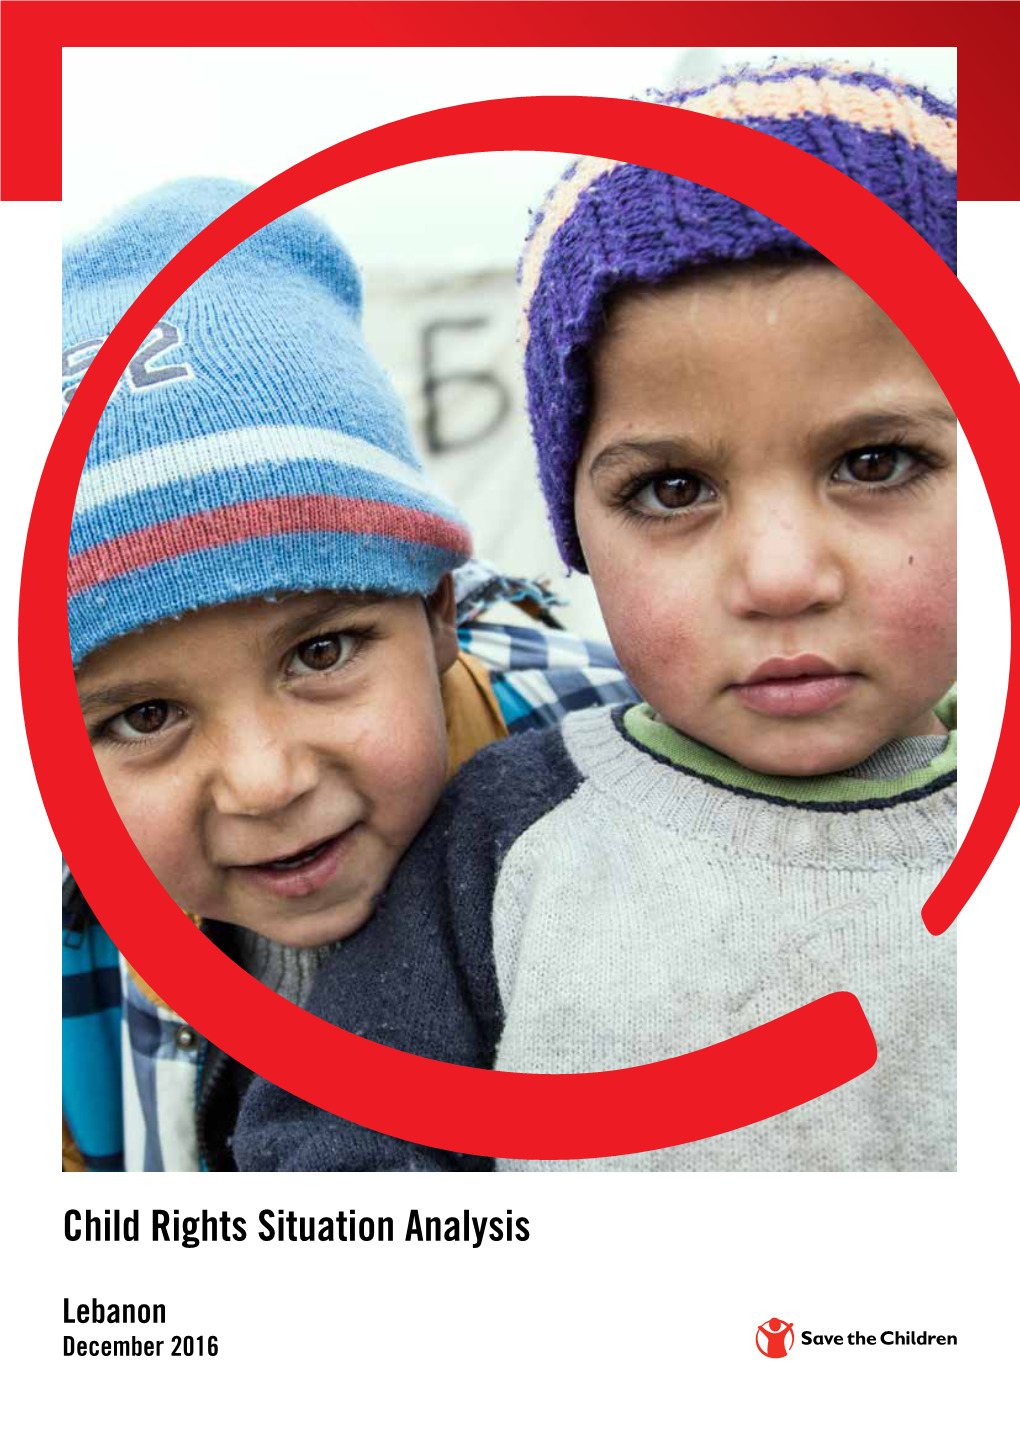 Child Rights Situation Analysis